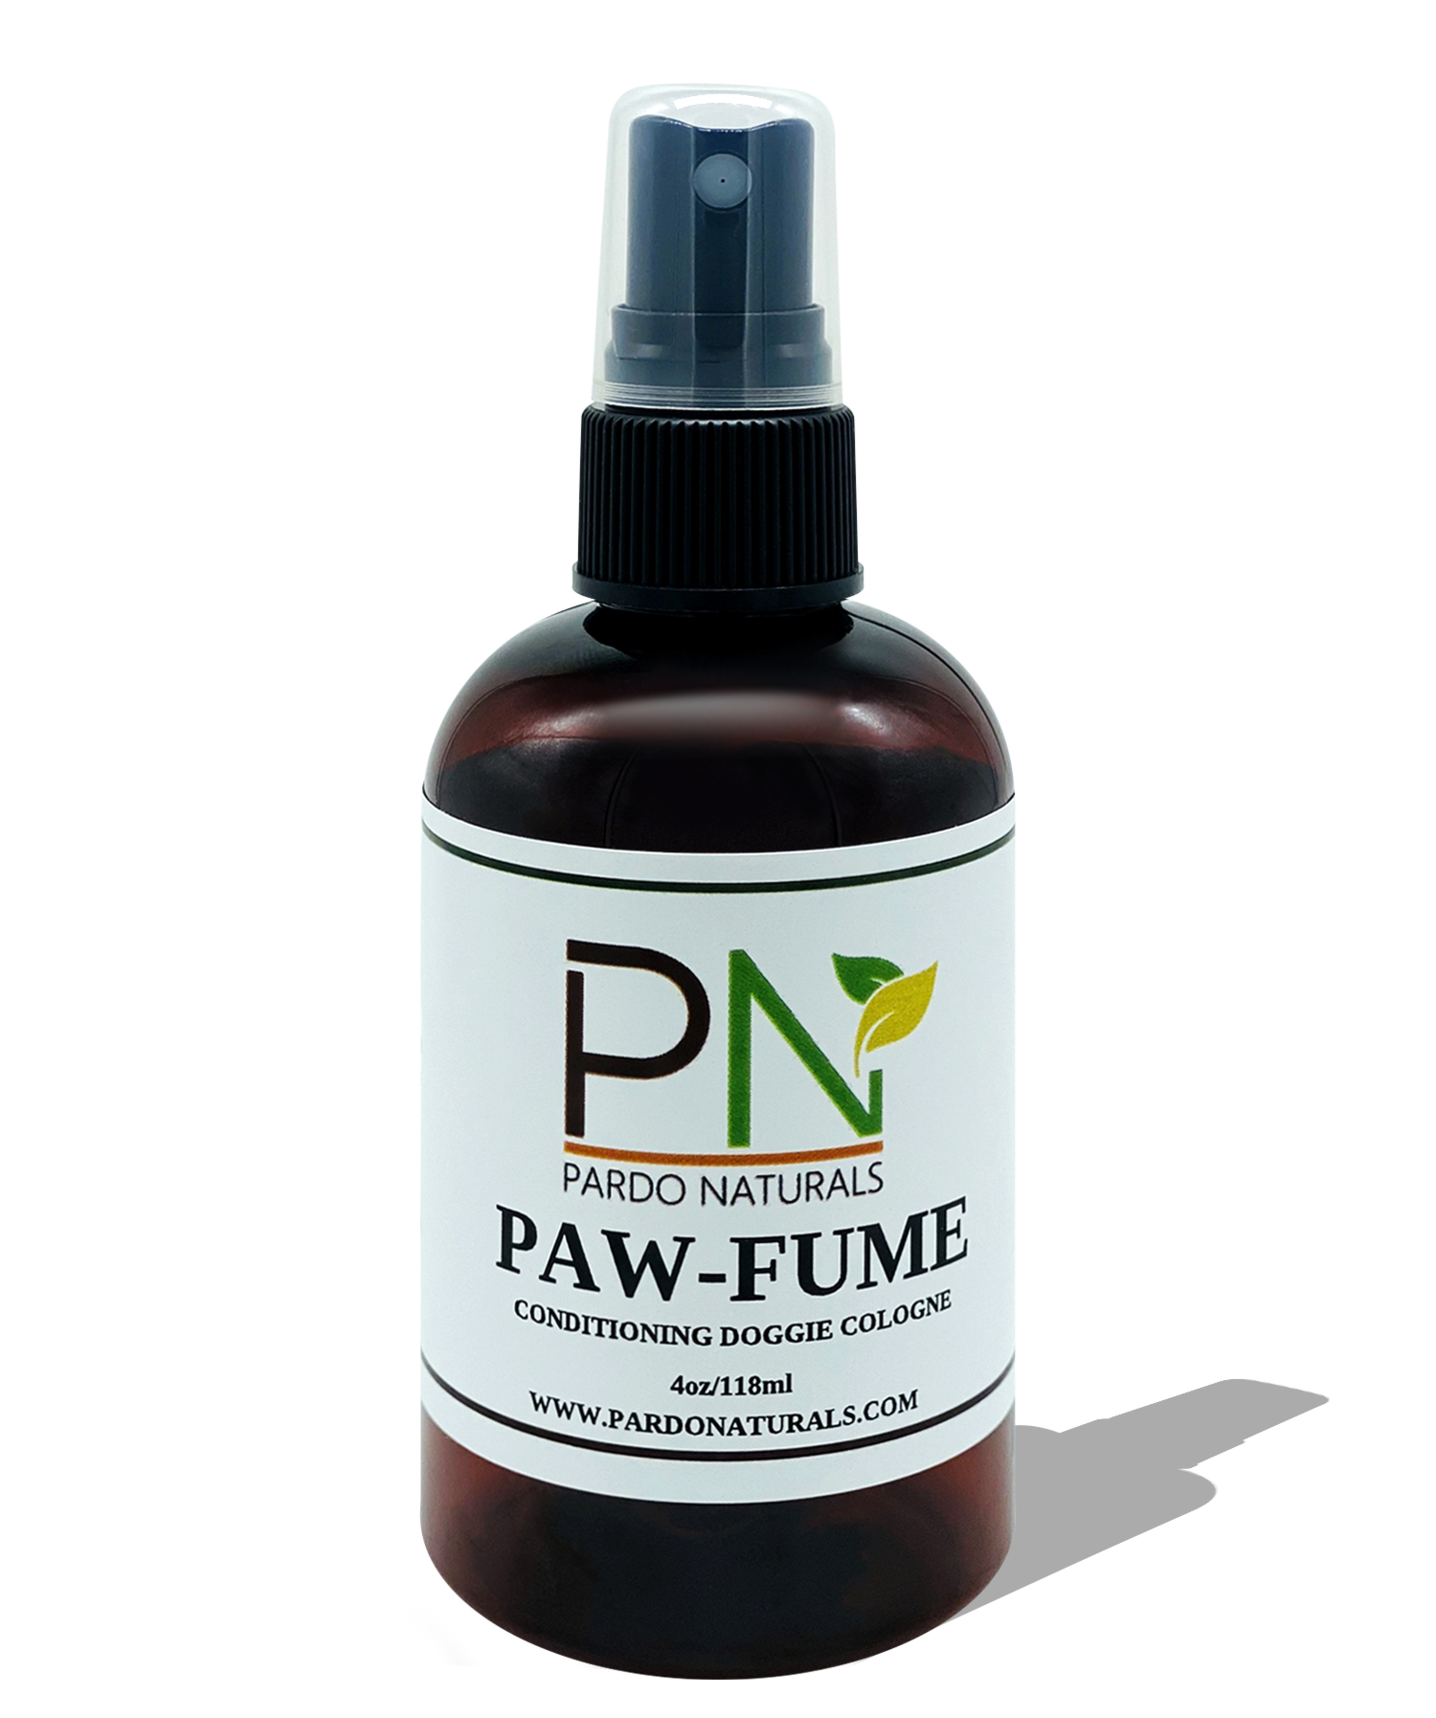 A bottle that reads &quot;Paw-Fume, conditioning doggie cologne&quot; from Pardo Naturals